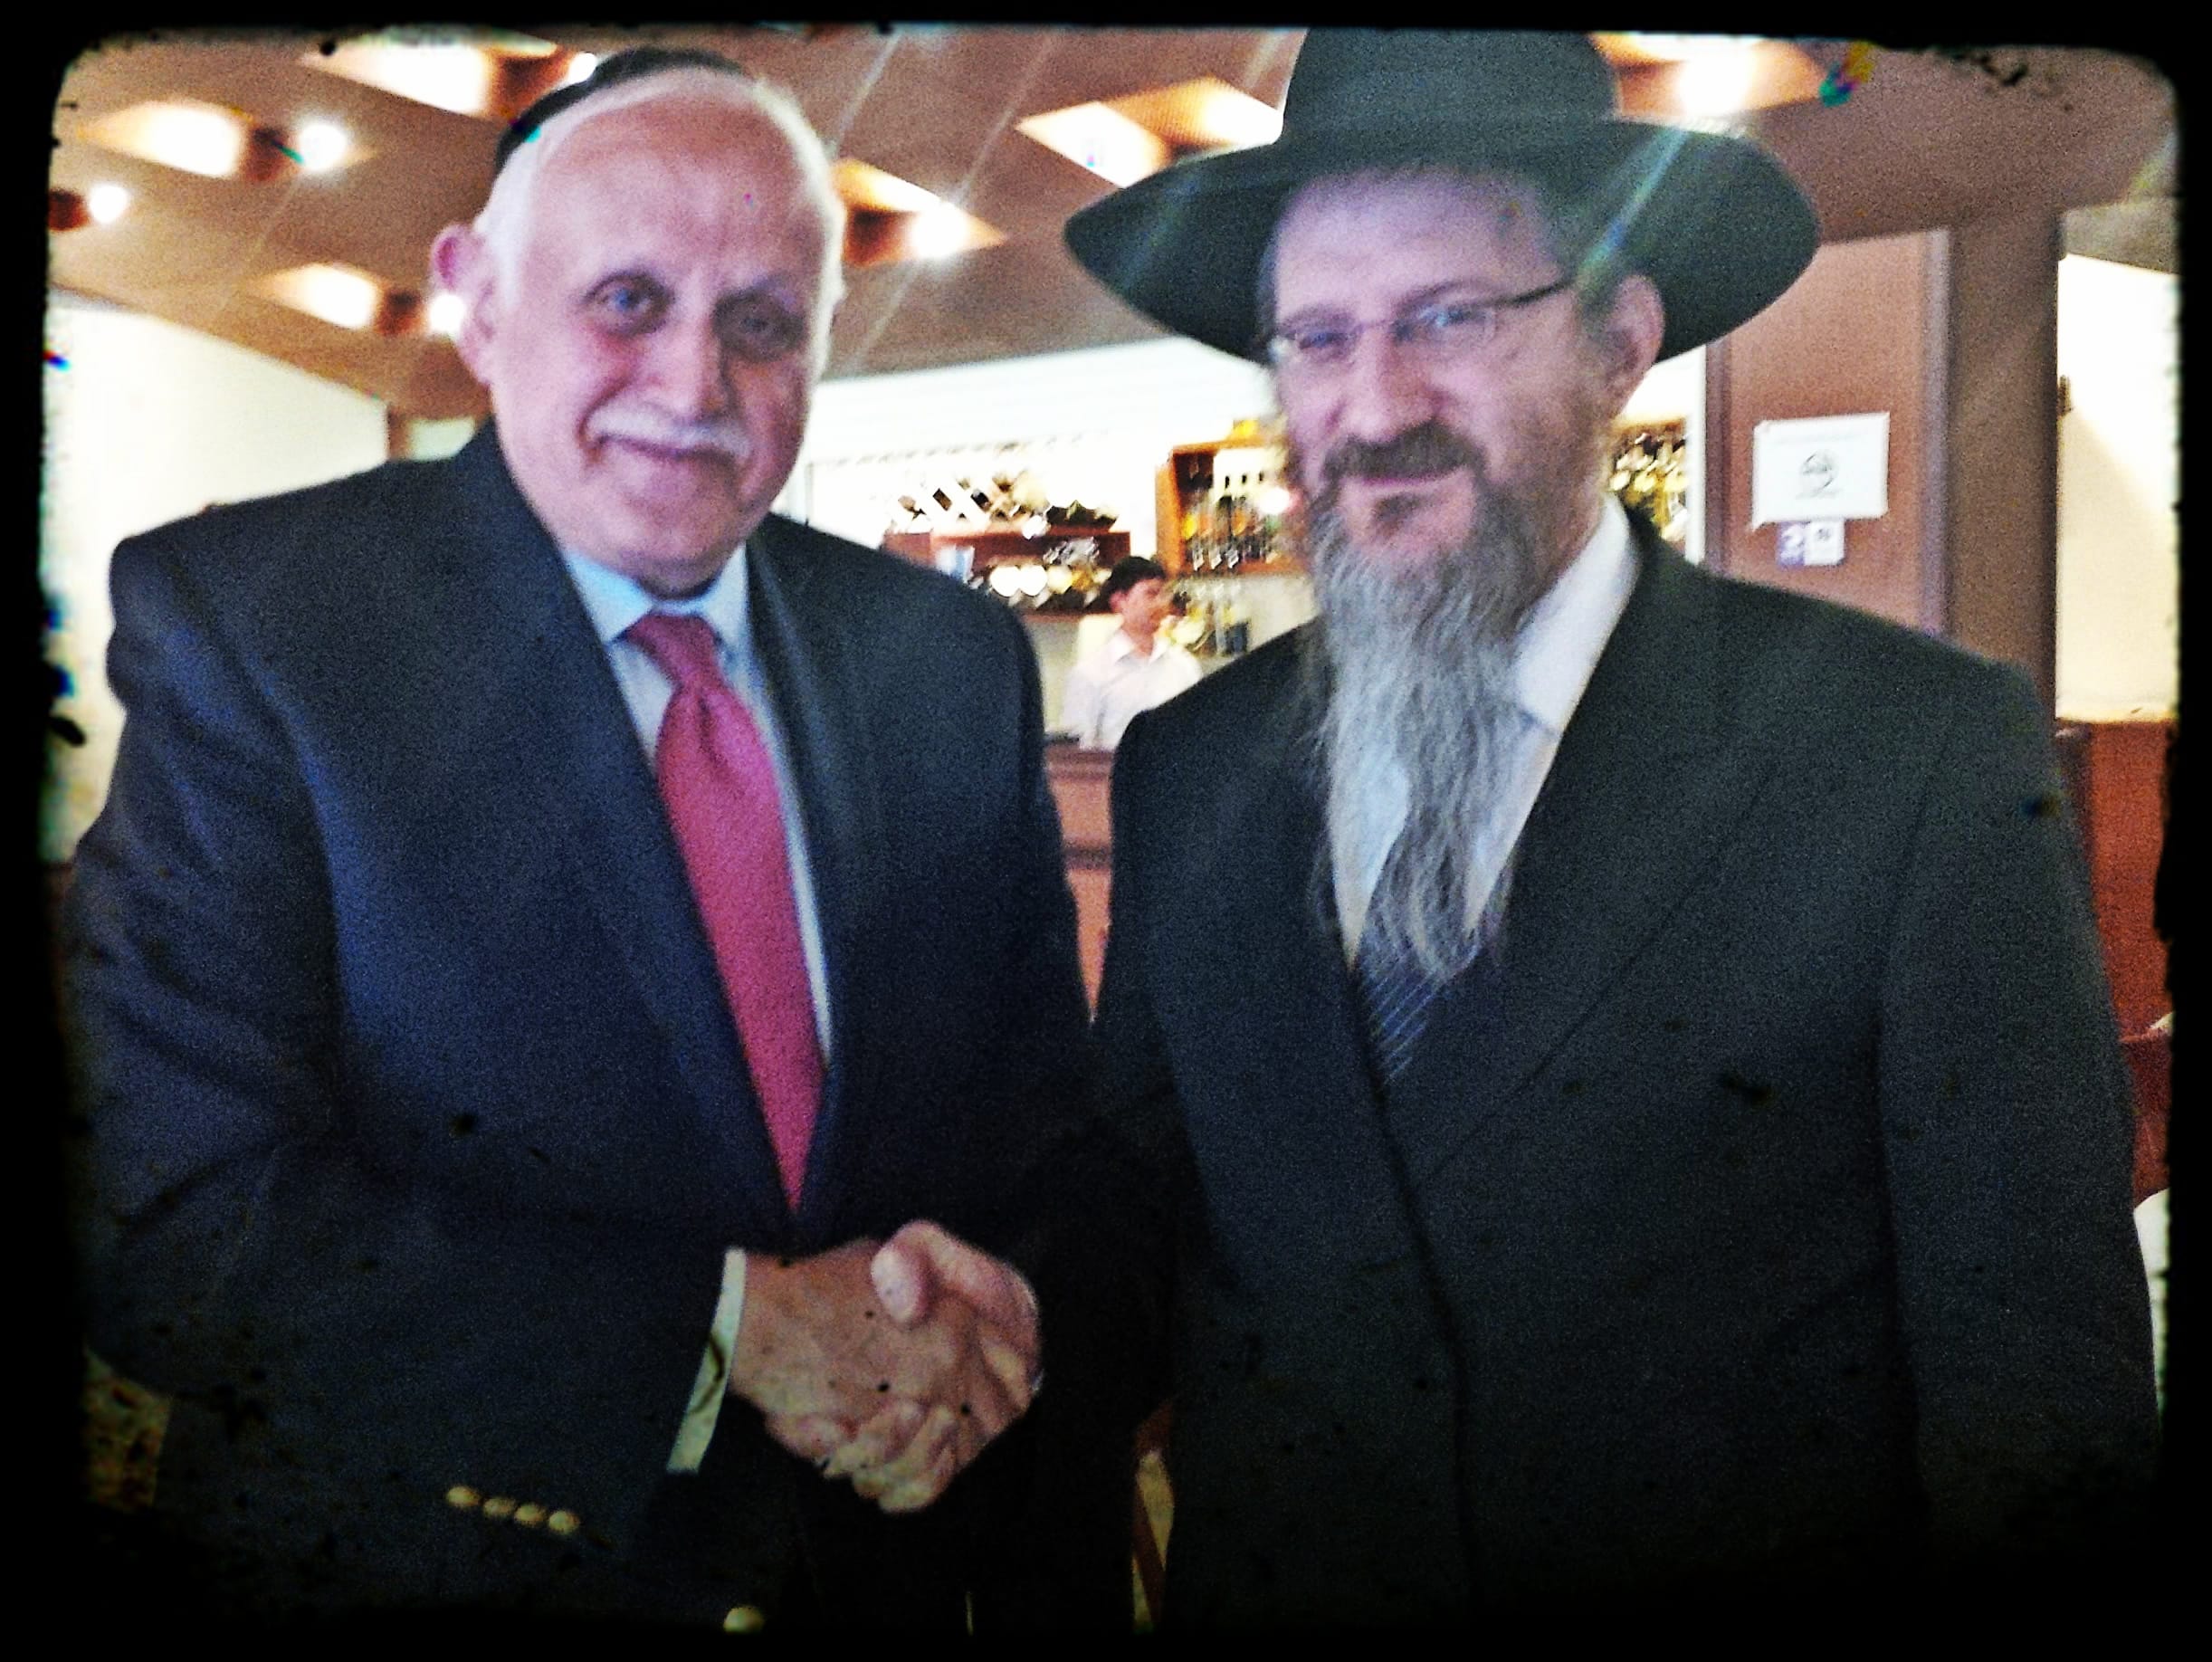 Dean Robert Goldschmidt, Vice President for Planning and Assessment, with Rabbi Berel Lazar, Chief Rabbi of Russia, at a dinner meeting.